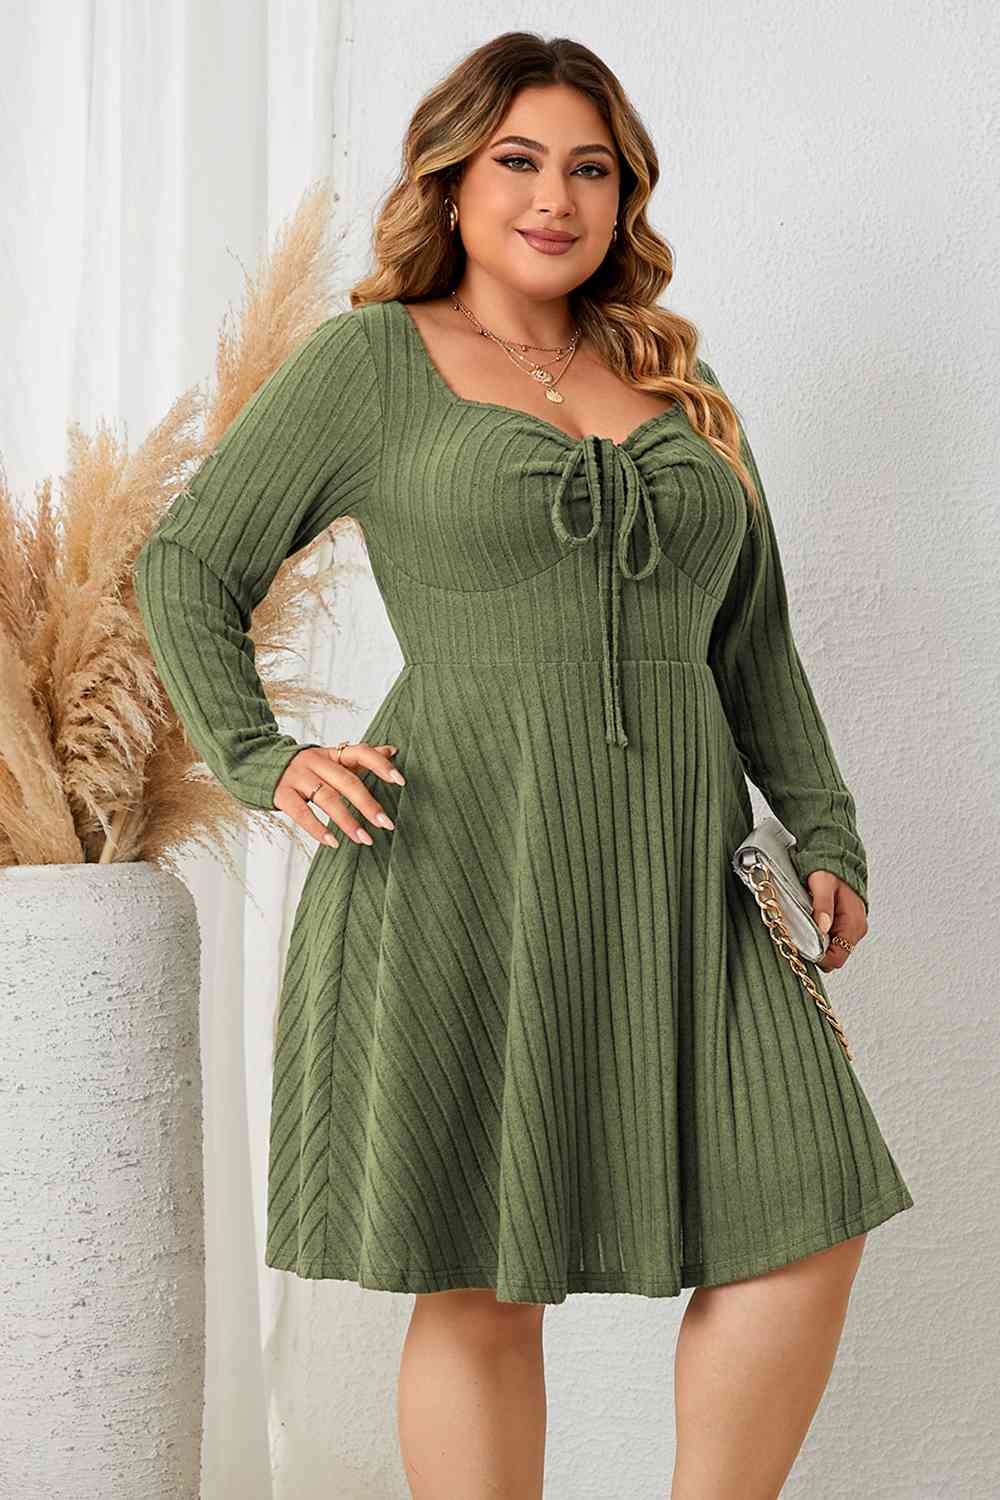 Plus Size Sweetheart Neck Long Sleeve Ribbed Dress - Kawaii Stop - Dress Up for Any Occasion, Effortless Elegance, Elegant Attire, Fashion Forward, Graceful and Stylish, HS, Must-Have Dress, Plus Size Fashion, Ribbed Dress, Ship From Overseas, Sophisticated Outfit, Sweetheart Neckline